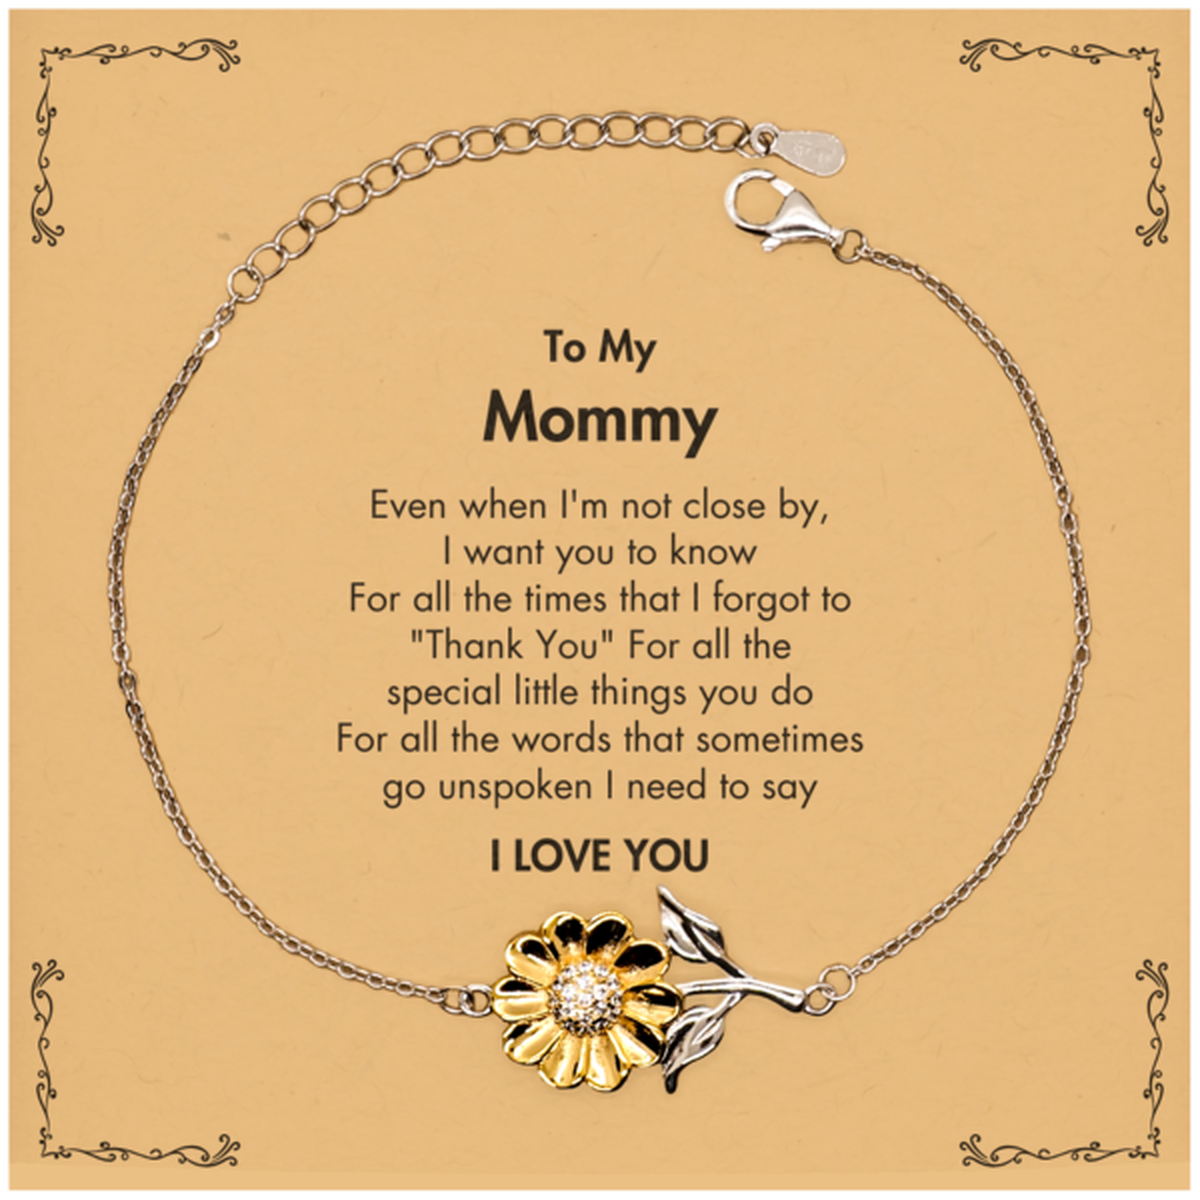 Thank You Gifts for Mommy, Keepsake Sunflower Bracelet Gifts for Mommy Birthday Mother's day Father's Day Mommy For all the words That sometimes go unspoken I need to say I LOVE YOU